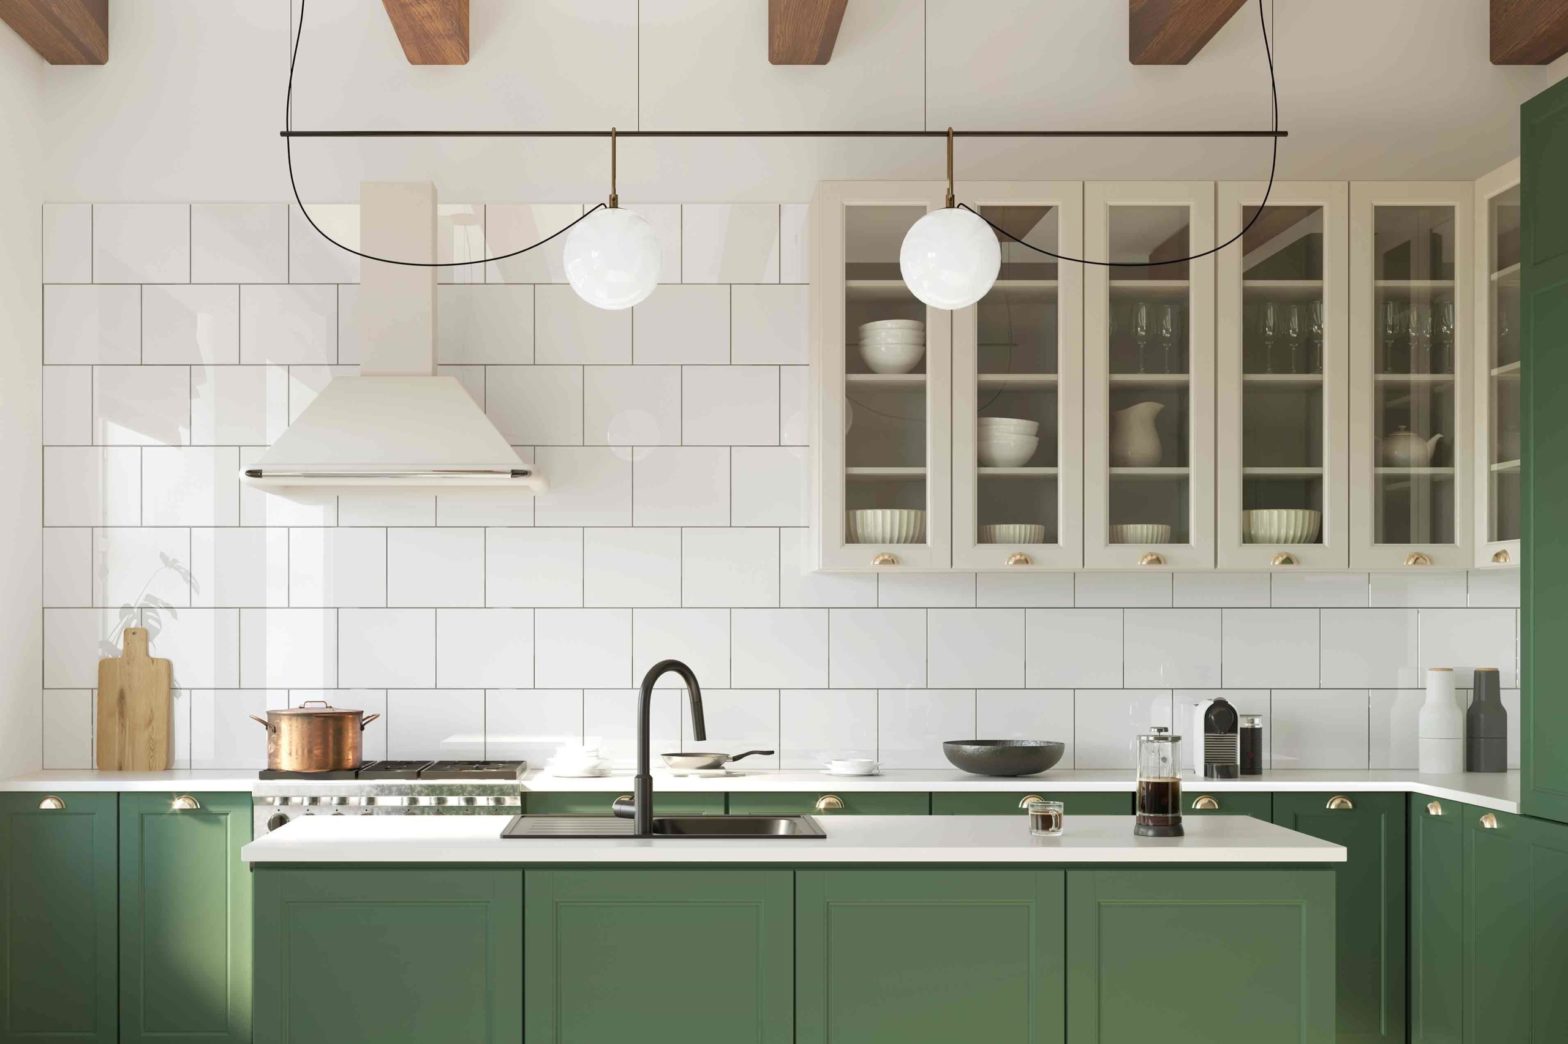 According to Remodeling Magazine, a Portland Kitchen Remodel Costs More Than the National Average.